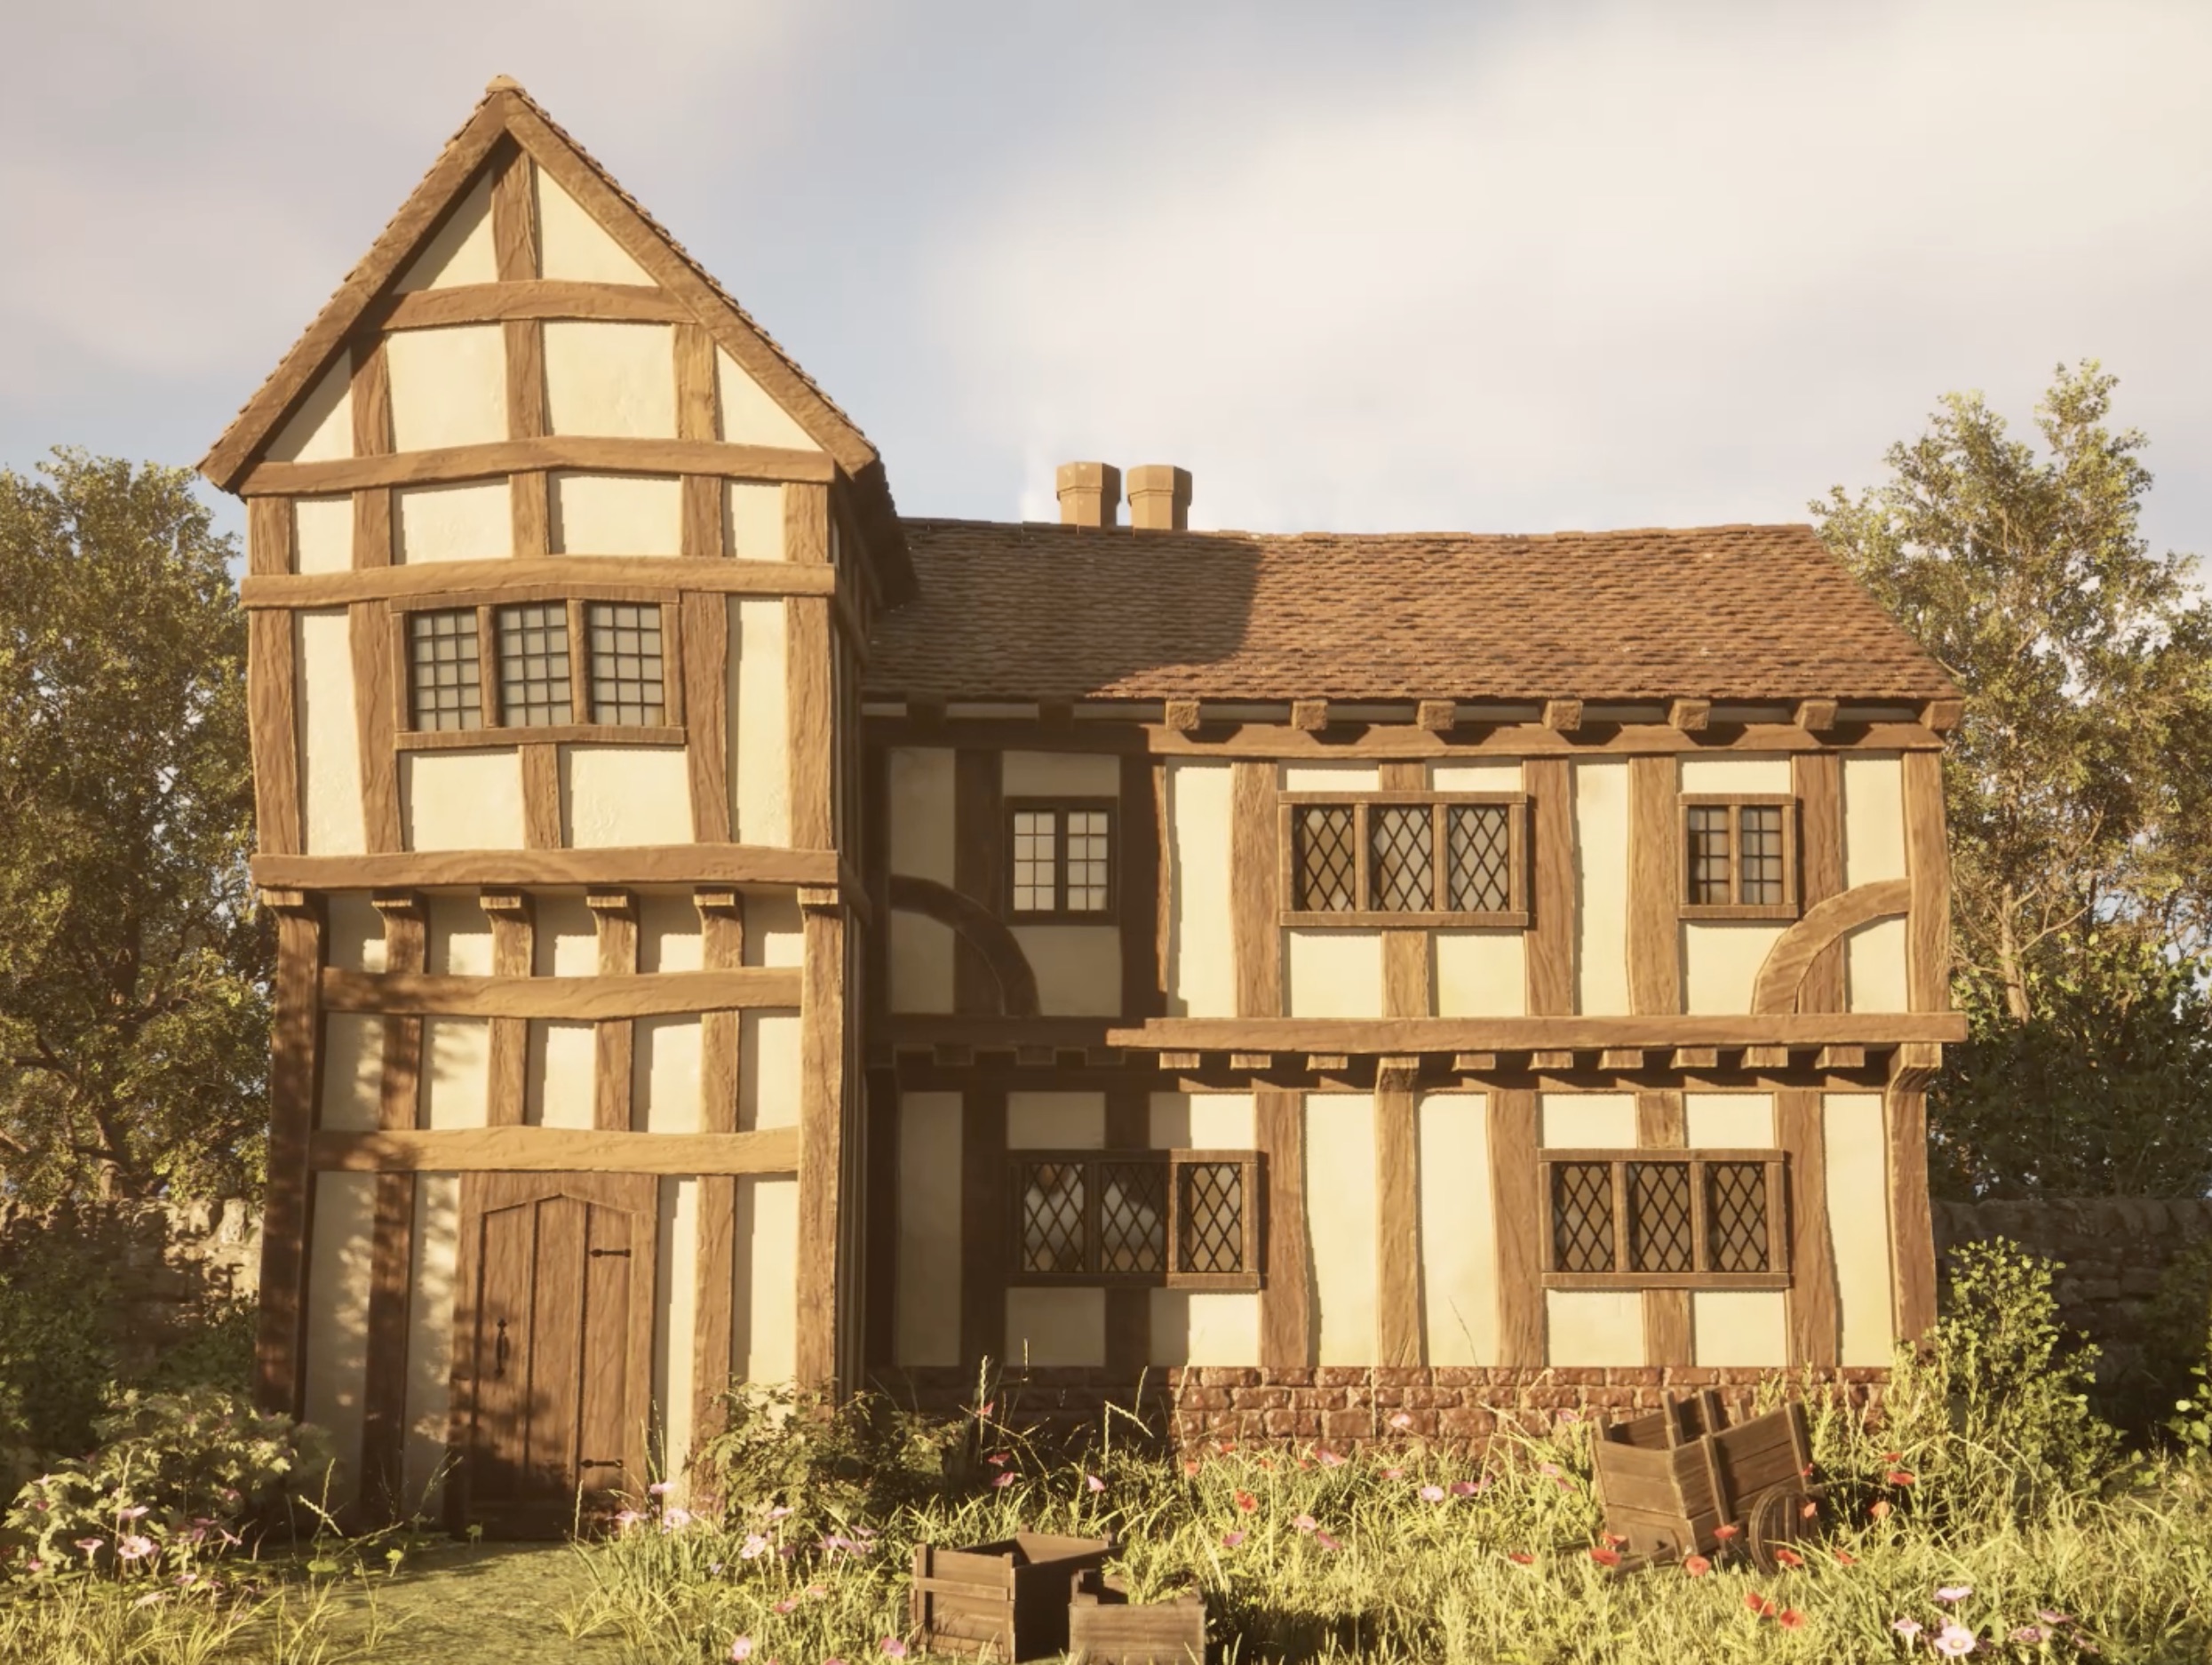 A Traditional Tudor House by Mia Godley. The rendered image shows a large Tudor style house surrounded by plants and trees.